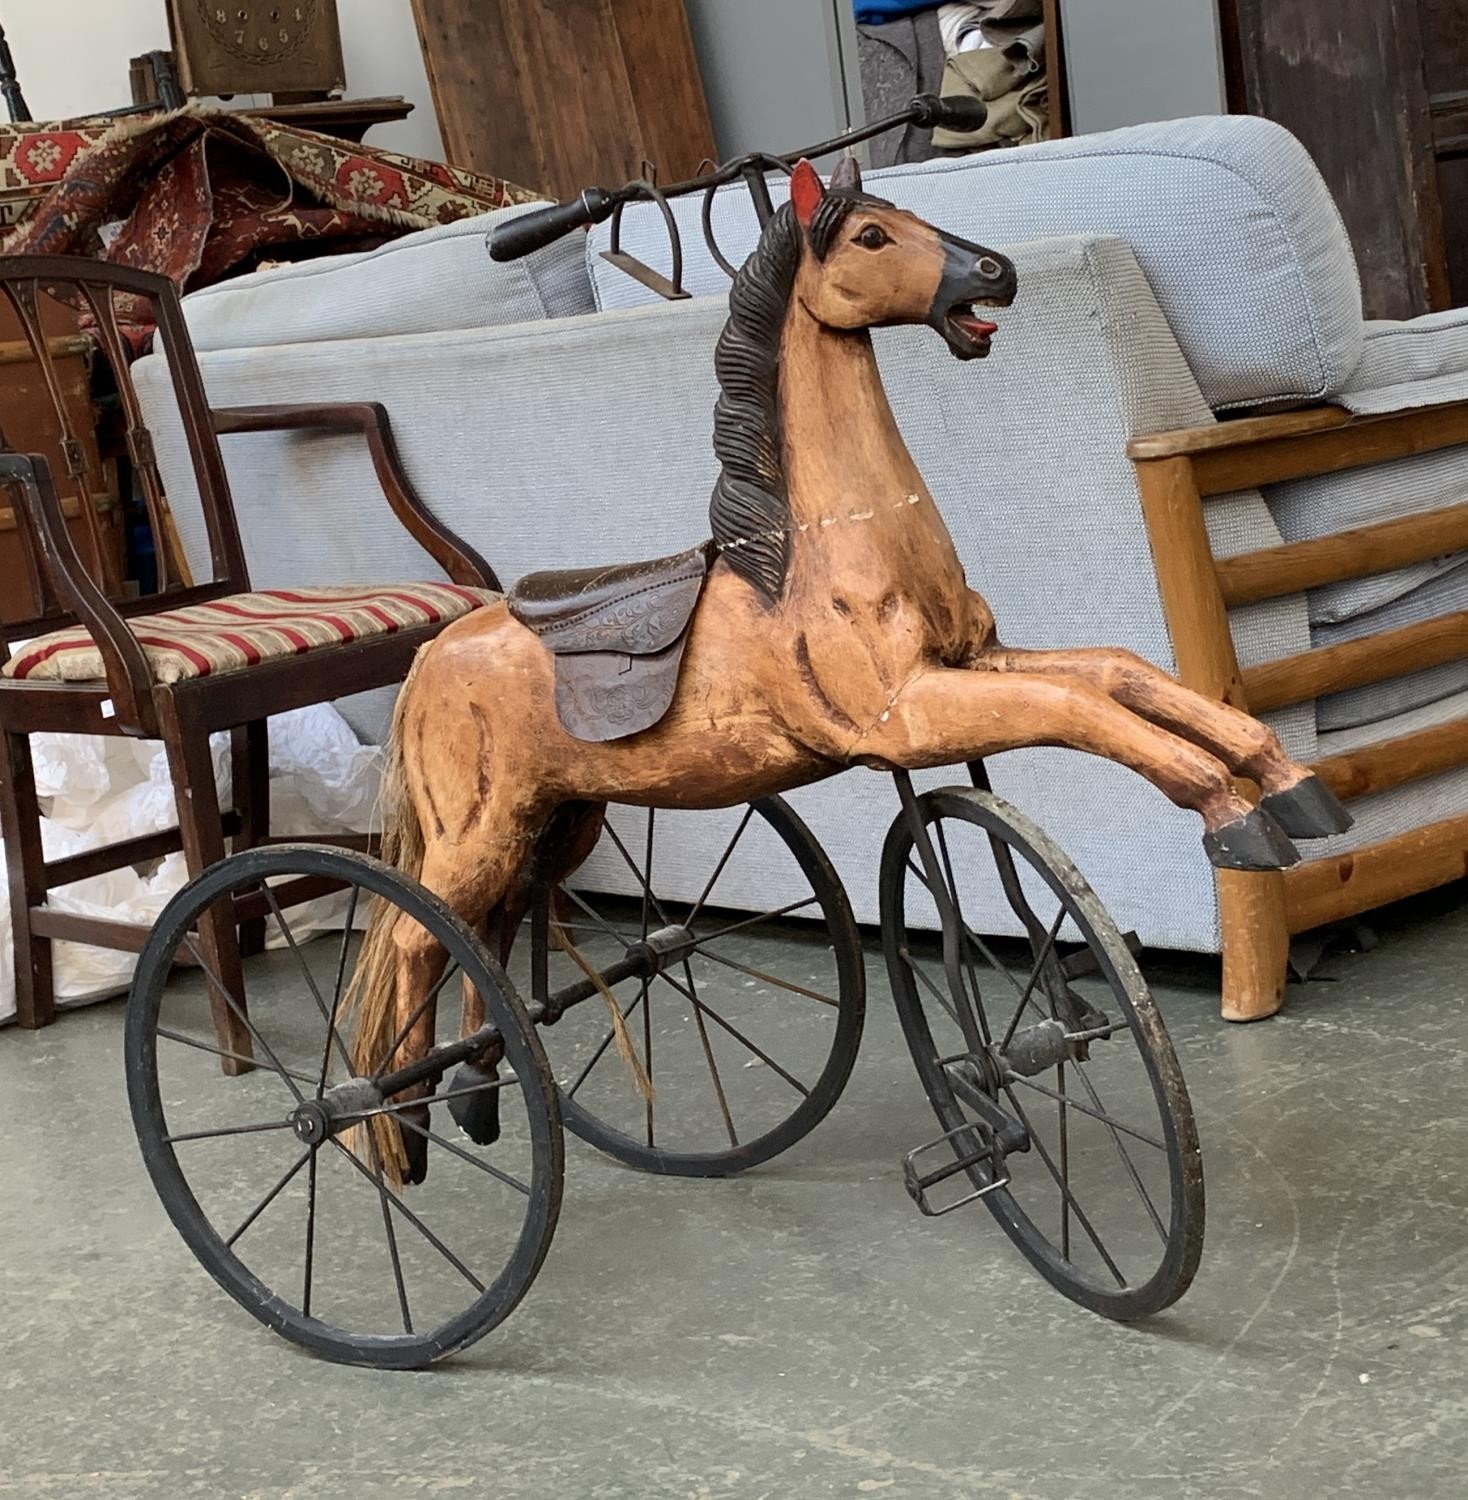 A vintage hobby horse tricycle with leather saddle, 88cmH